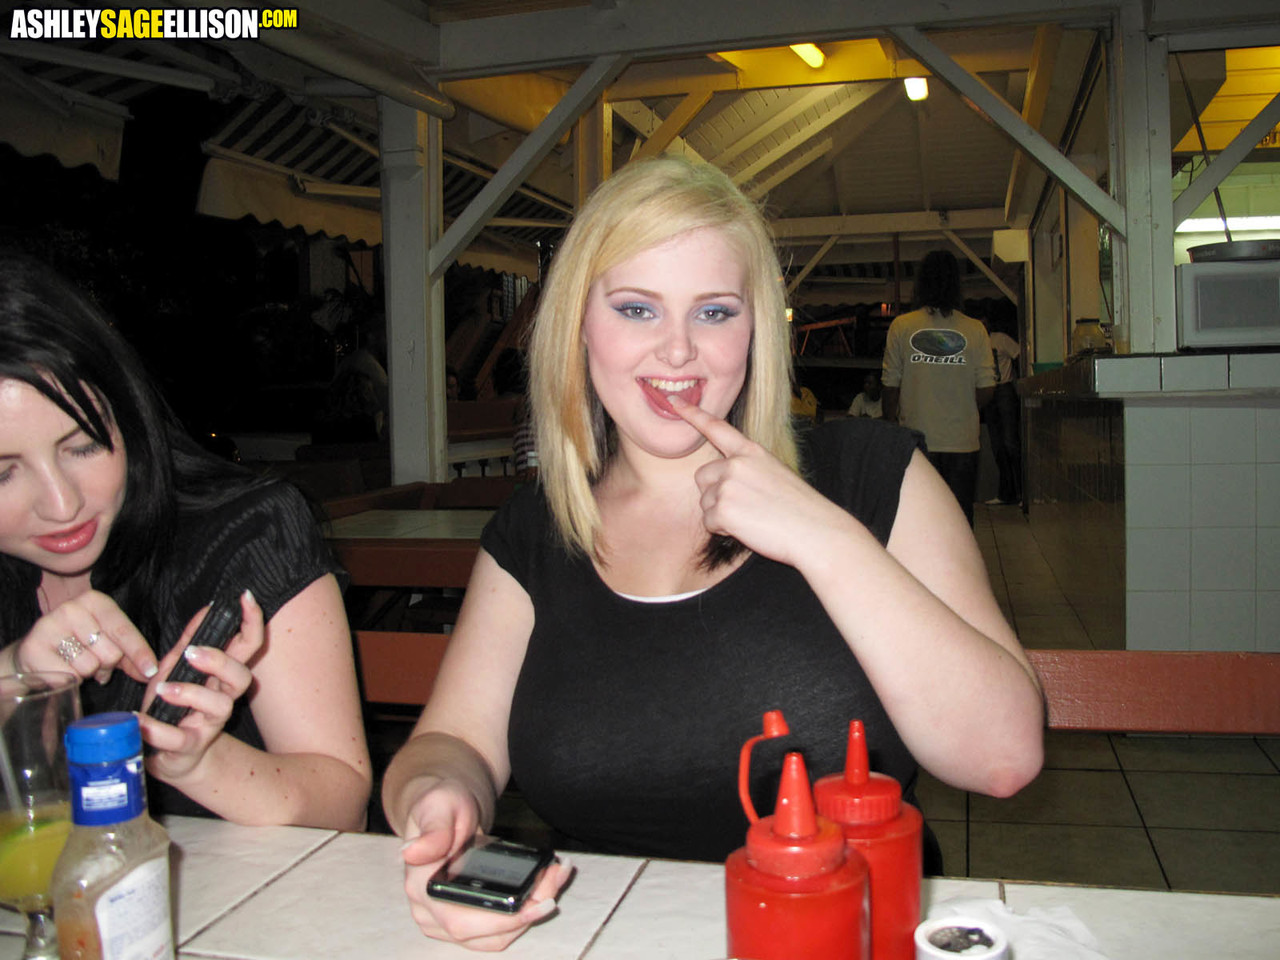 Fat chick Ashley Sage Ellison and her busty gf go out on the town porn photo #426376435